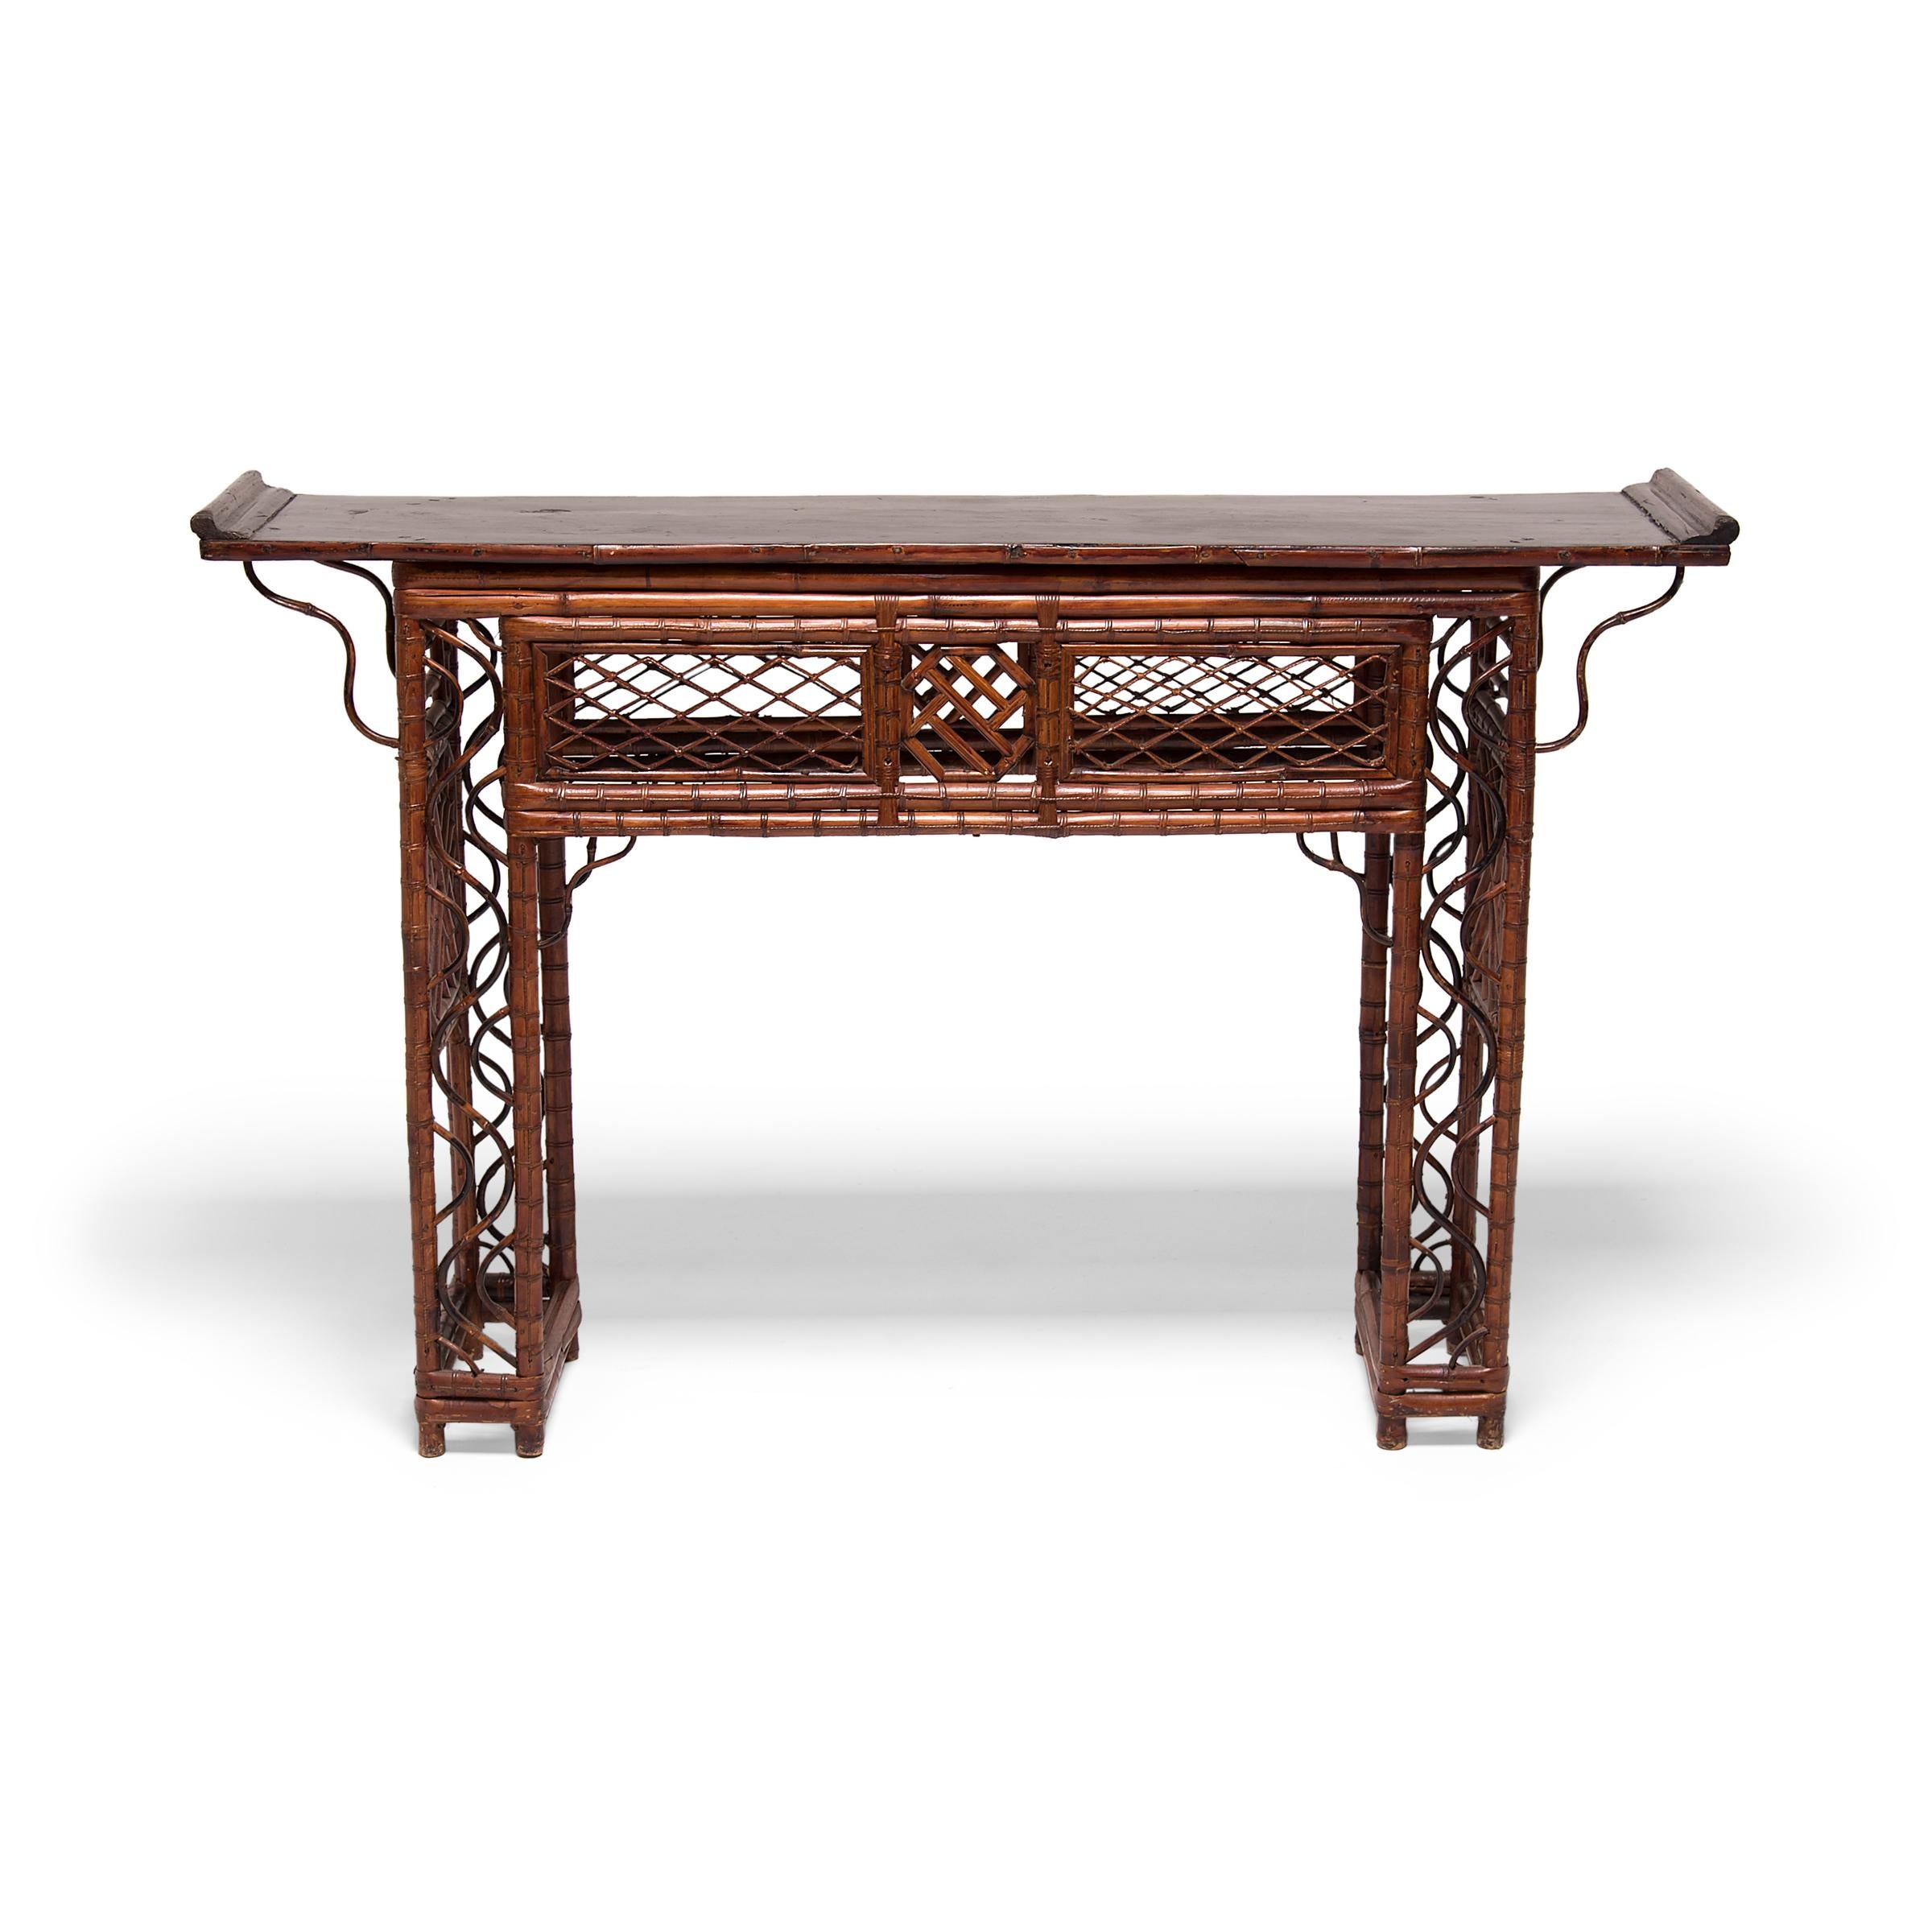 The artisan who created this exquisite lattice altar table must have truly been a master of their craft. Constructed of carefully bent bamboo, the table has a straight, open frame patterned with intricate latticework. The abundant latticework